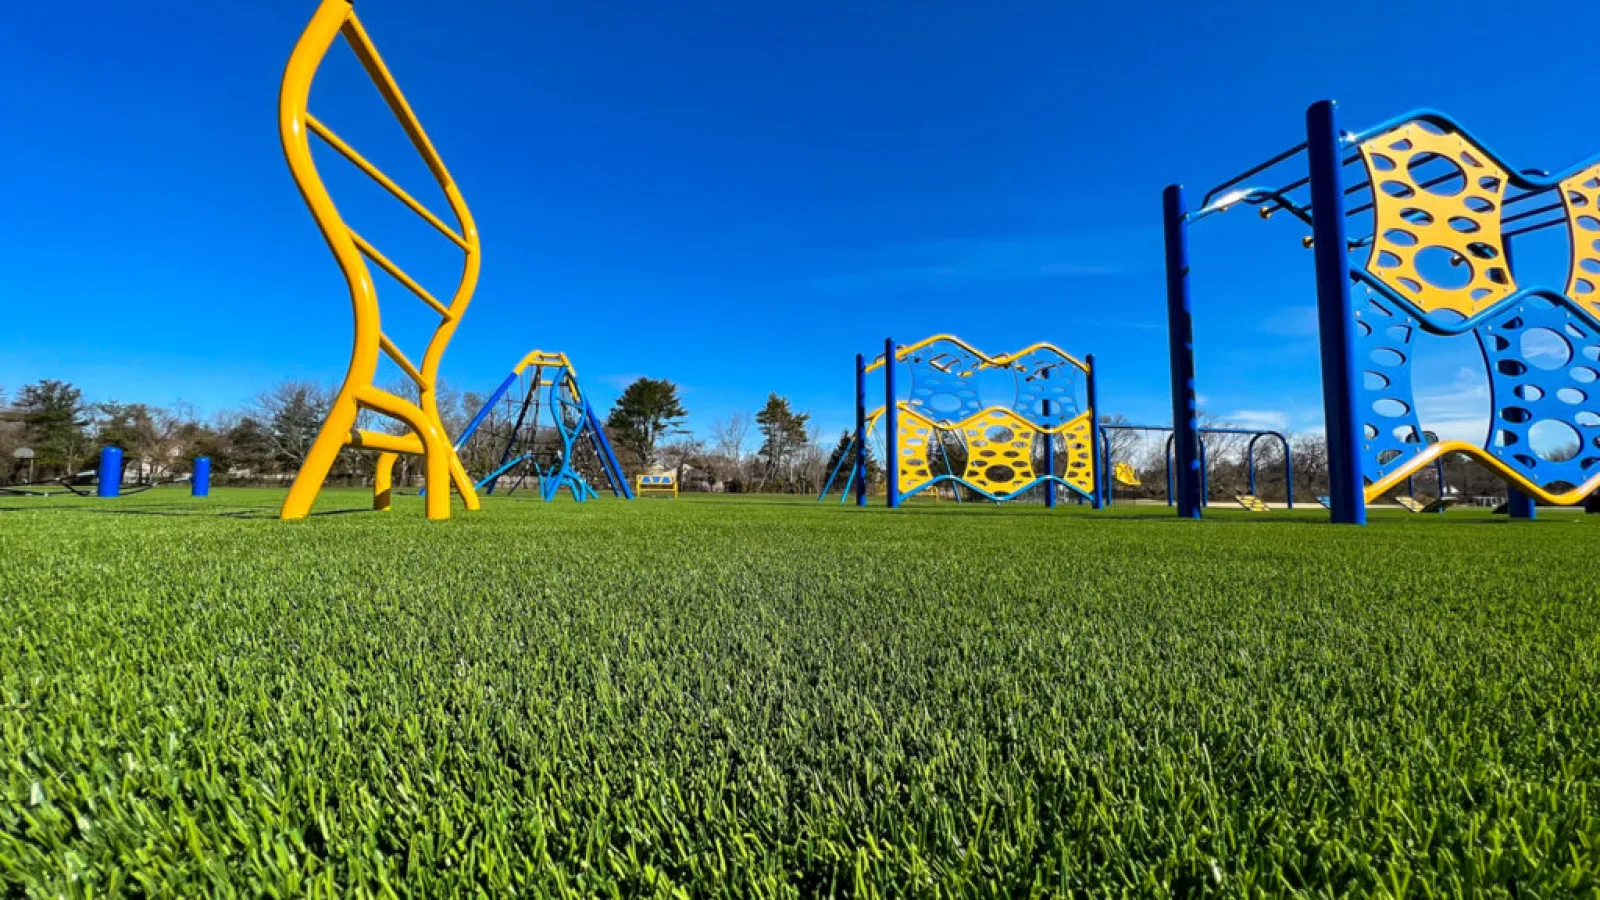 a grassy field with a playground in the background